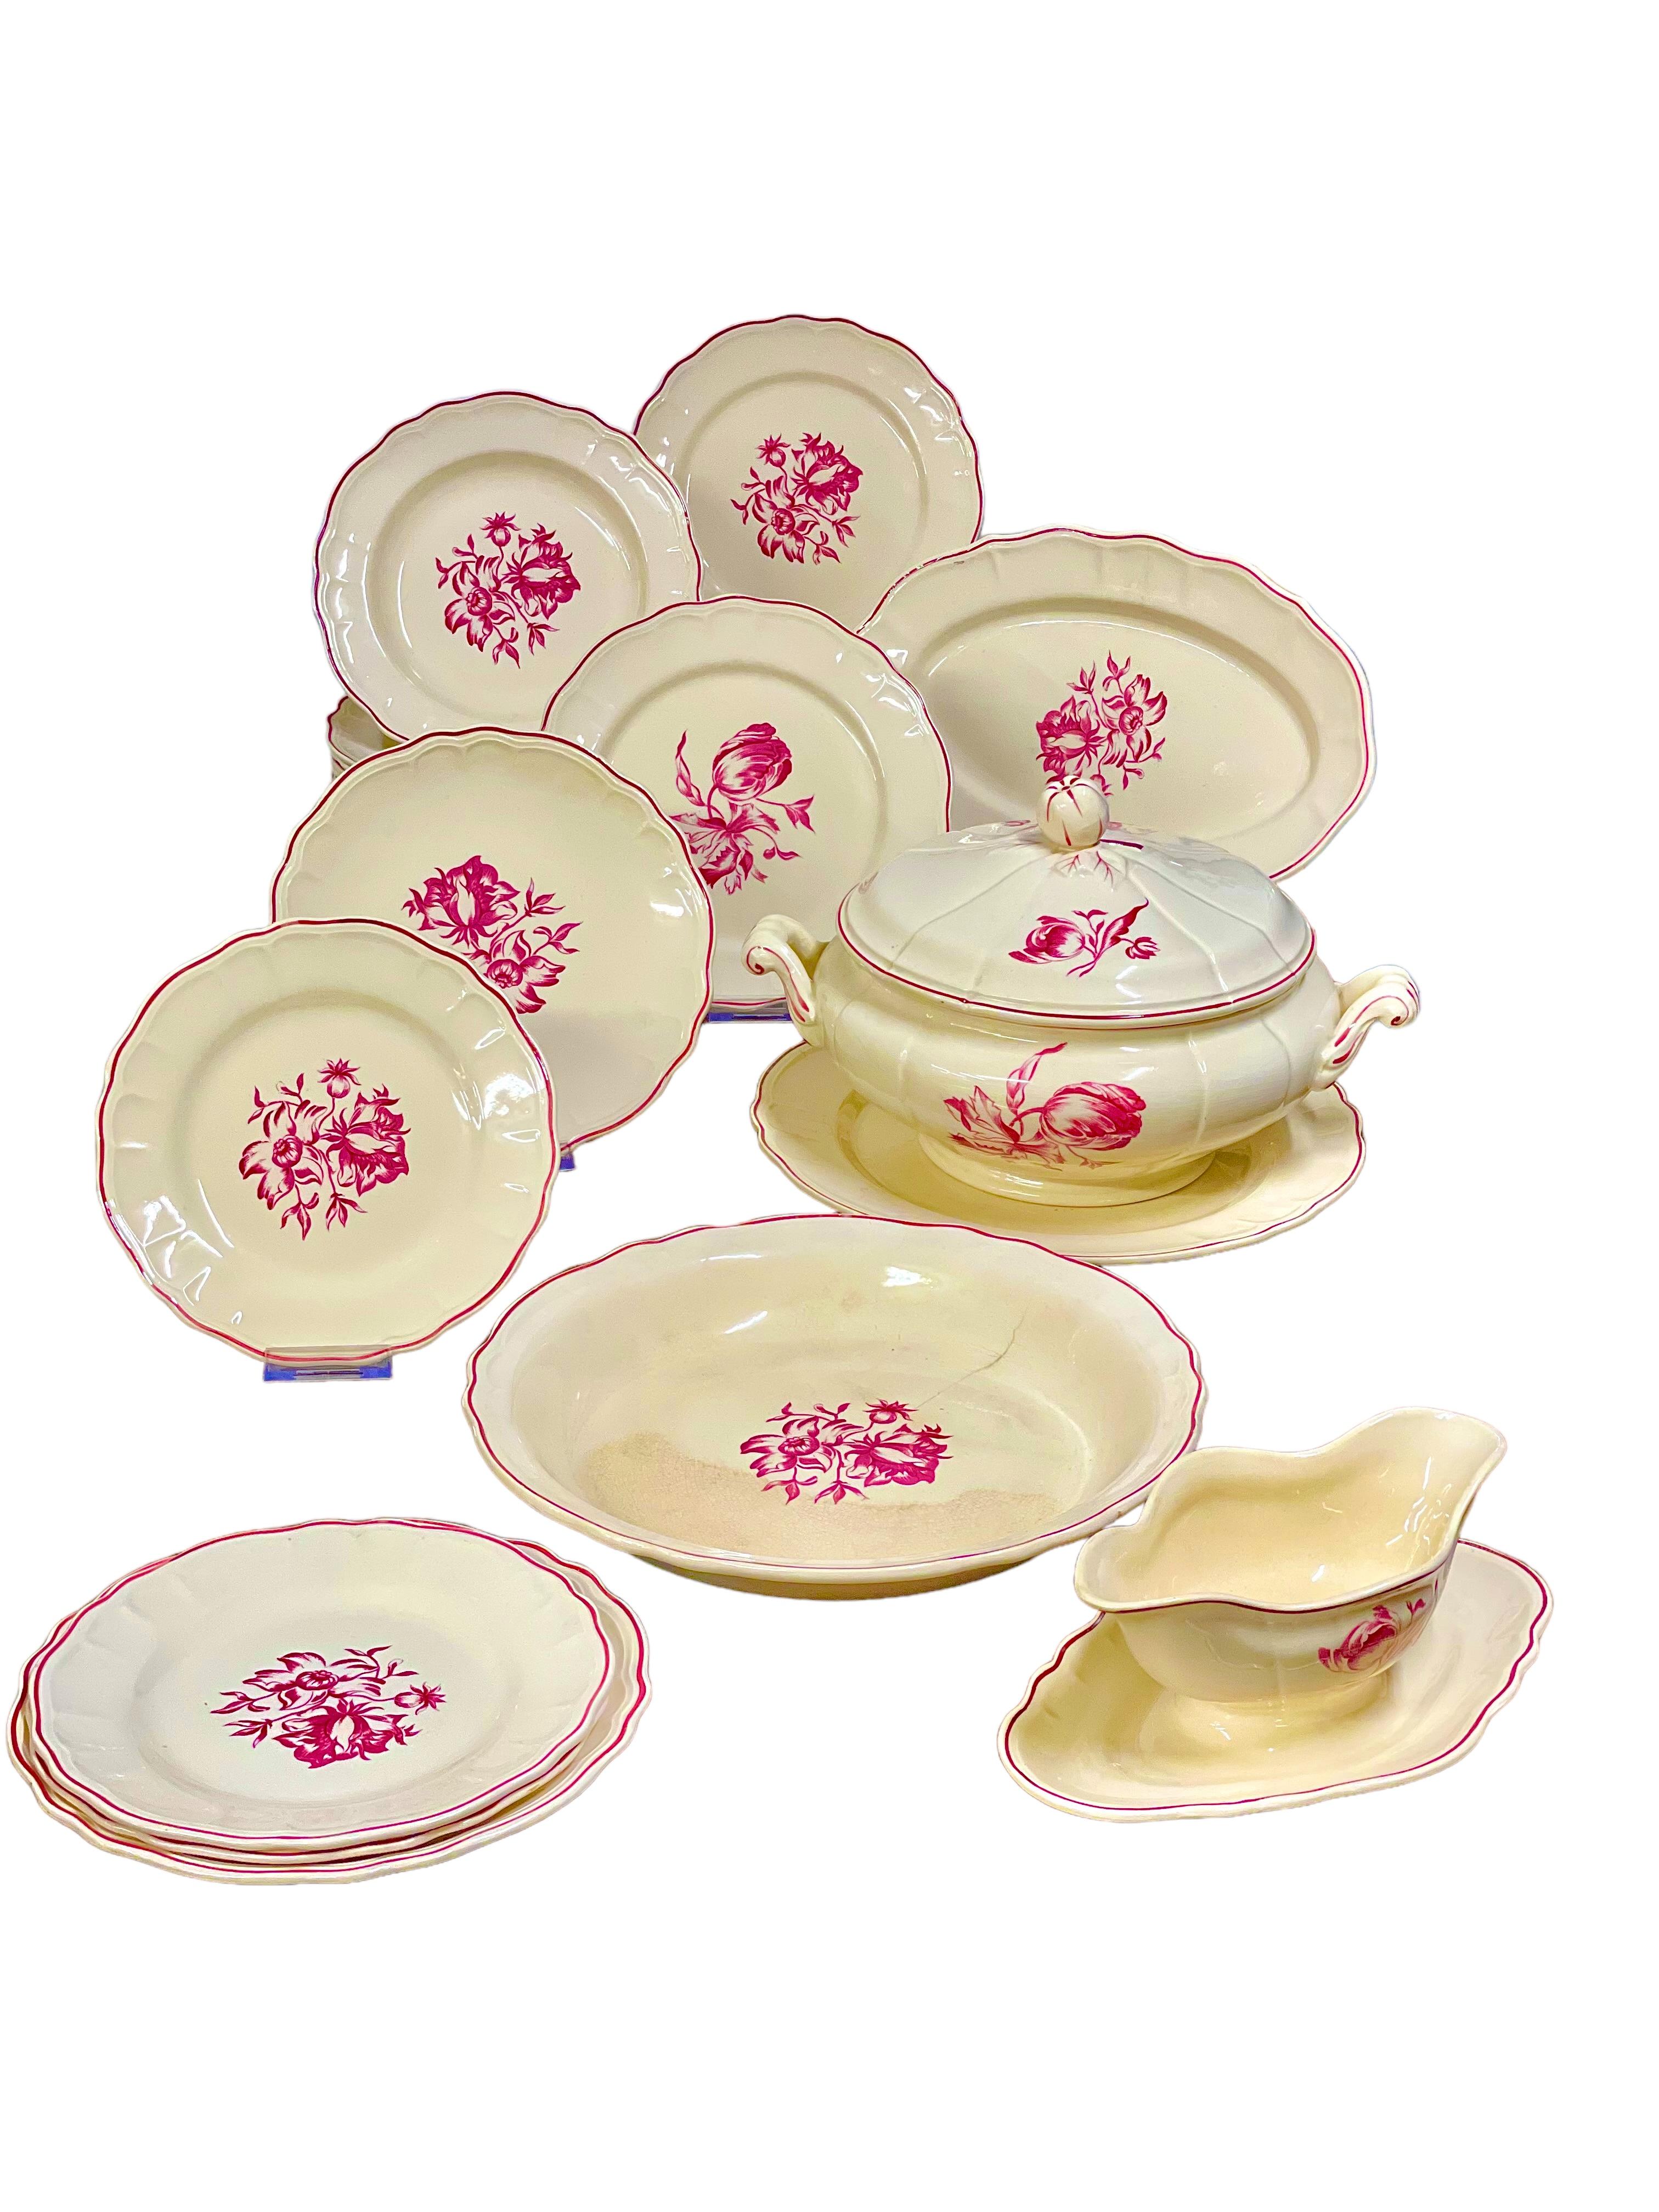 19th Century Set of Six Vintage Creamware Plates For Sale